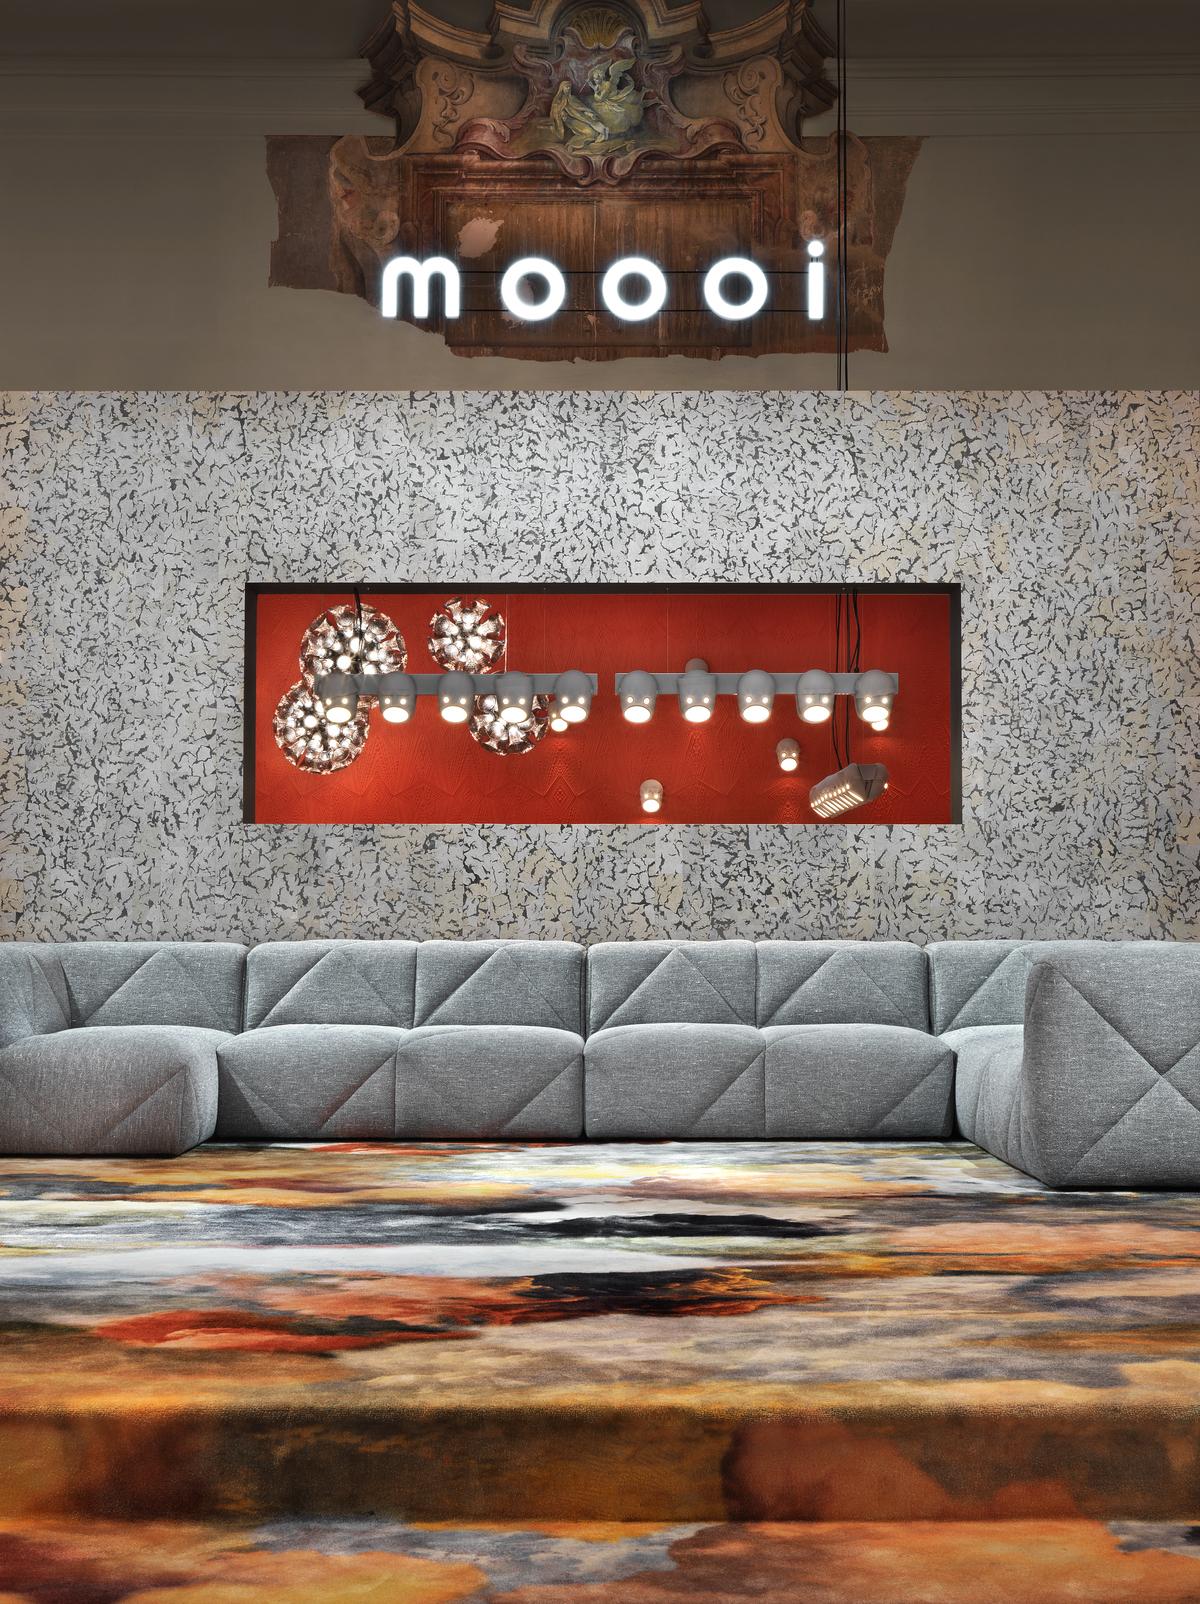 Moooi BFF Triple Seater TE01 Low Sofa in Divina MD, 683 Purple Upholstery In New Condition For Sale In Brooklyn, NY